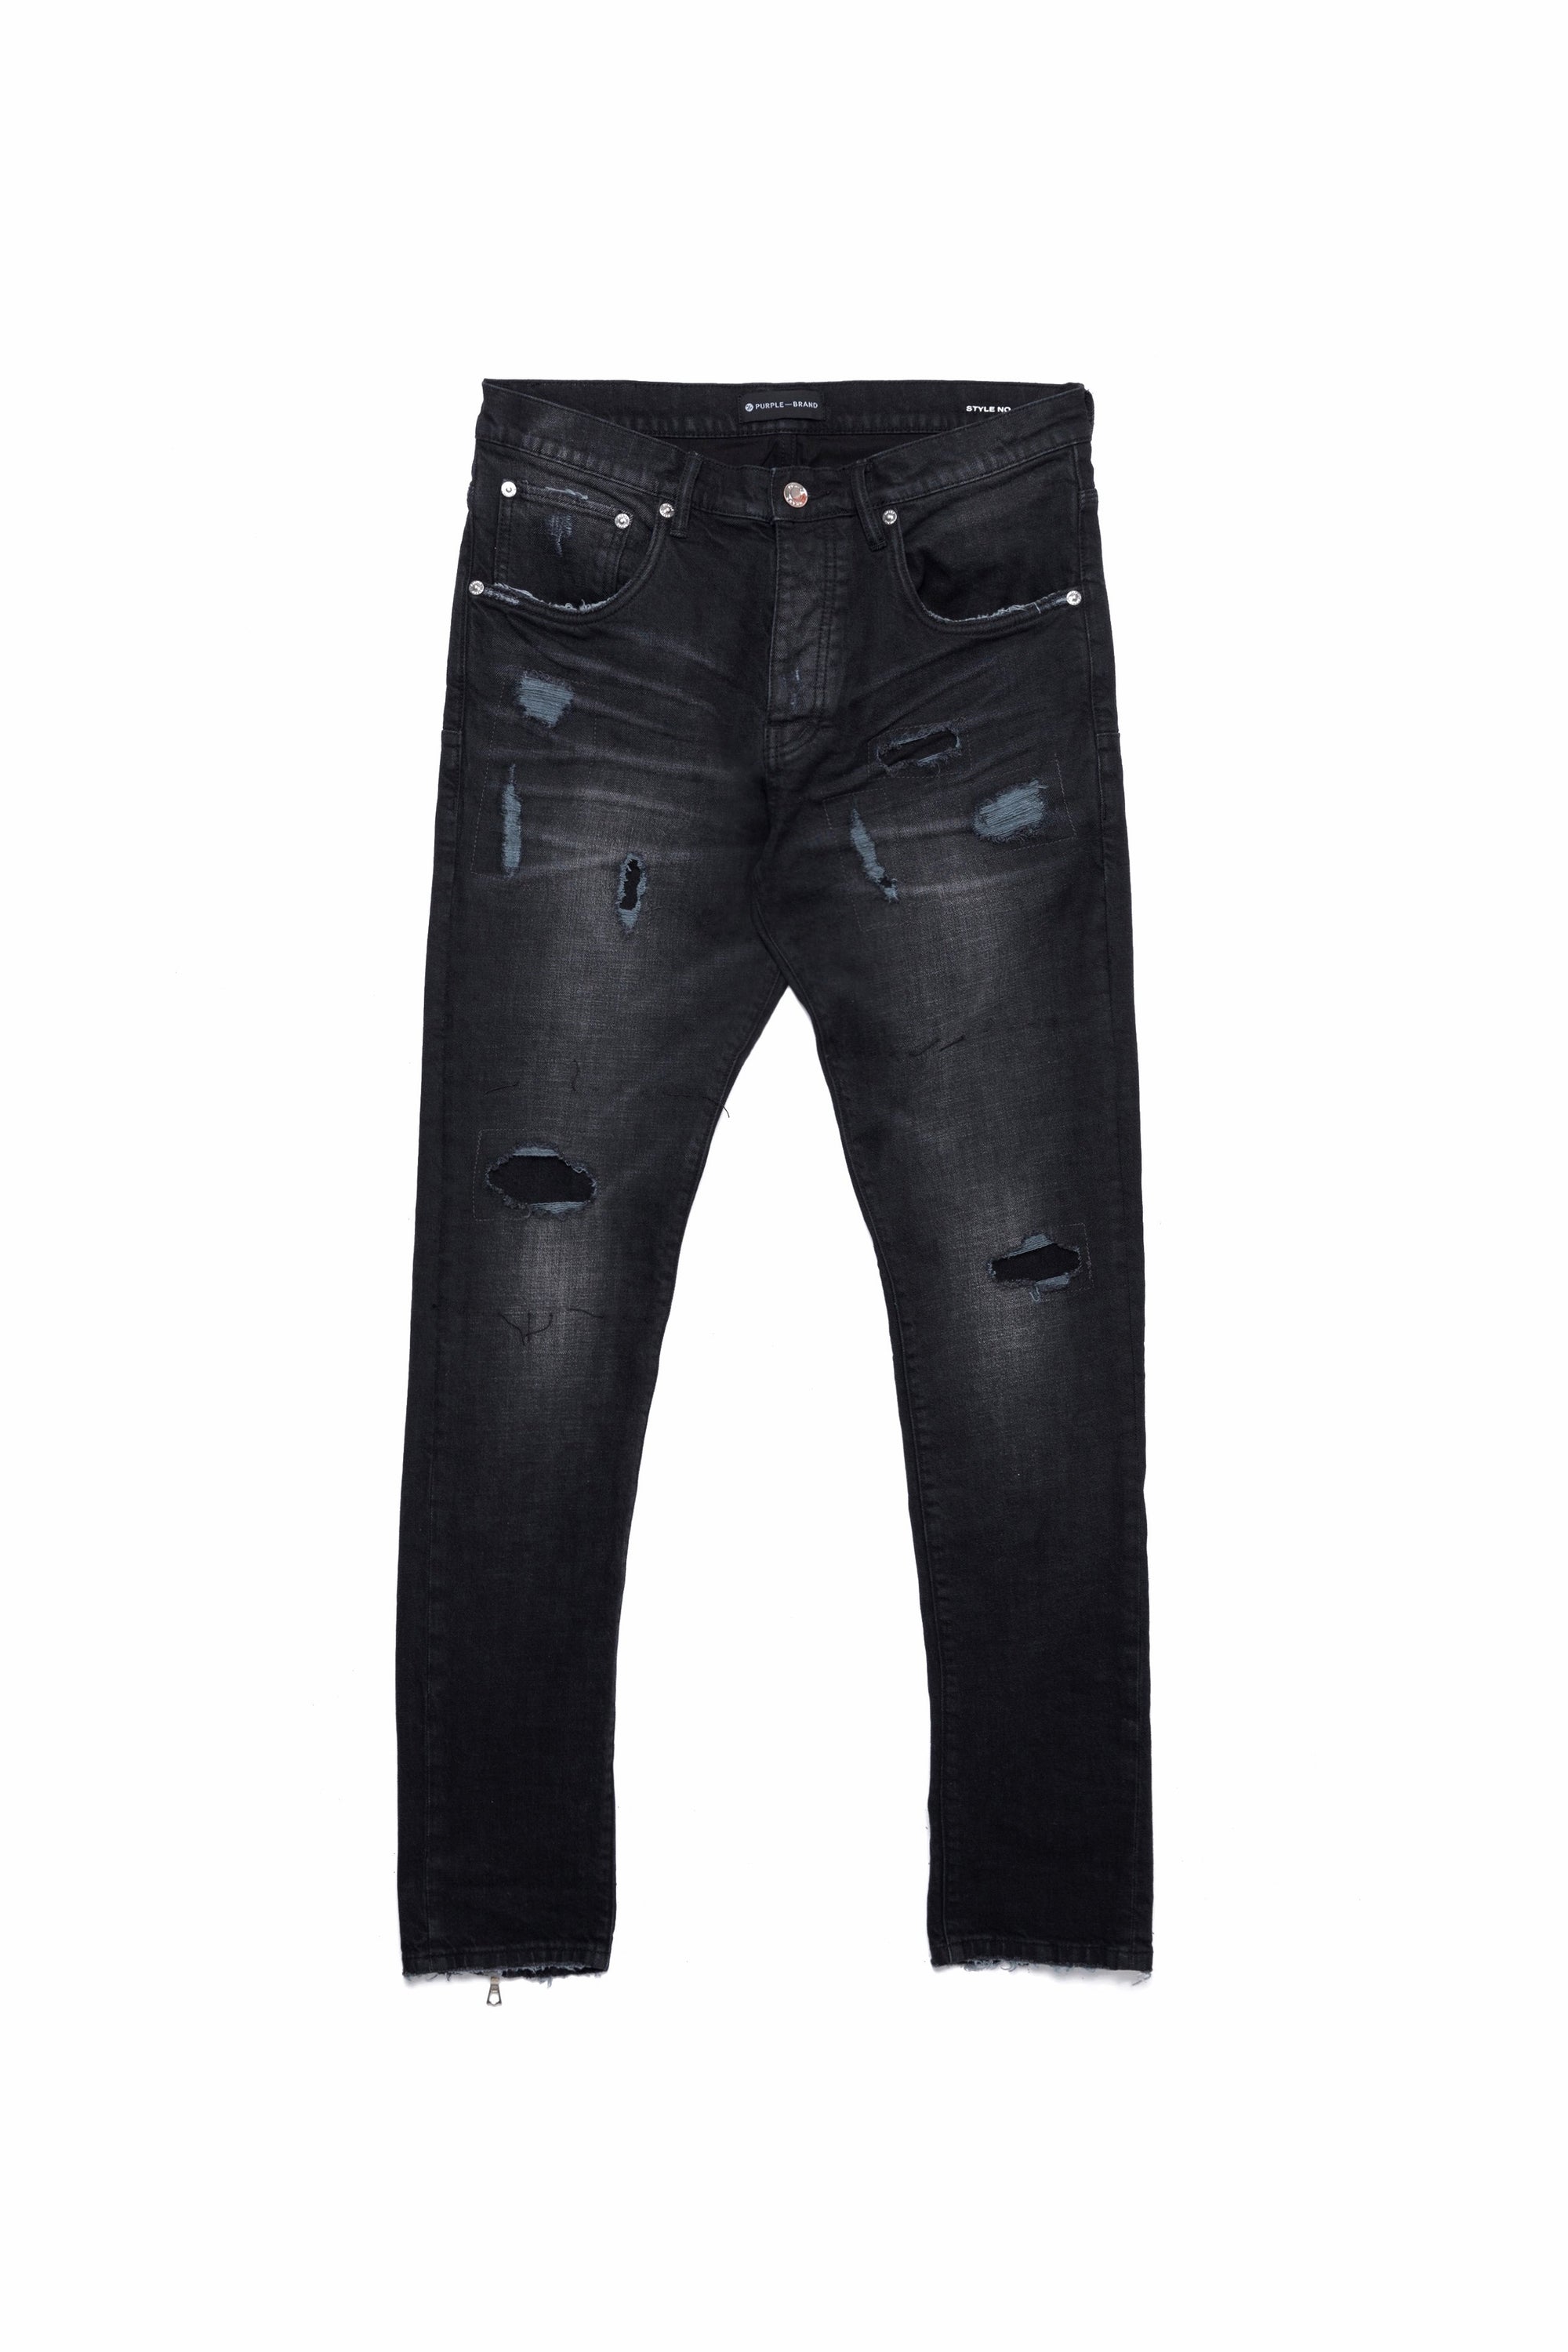 P002 MID RISE WITH TAPERED LEG - Black Wash Zip – PURPLE BRAND